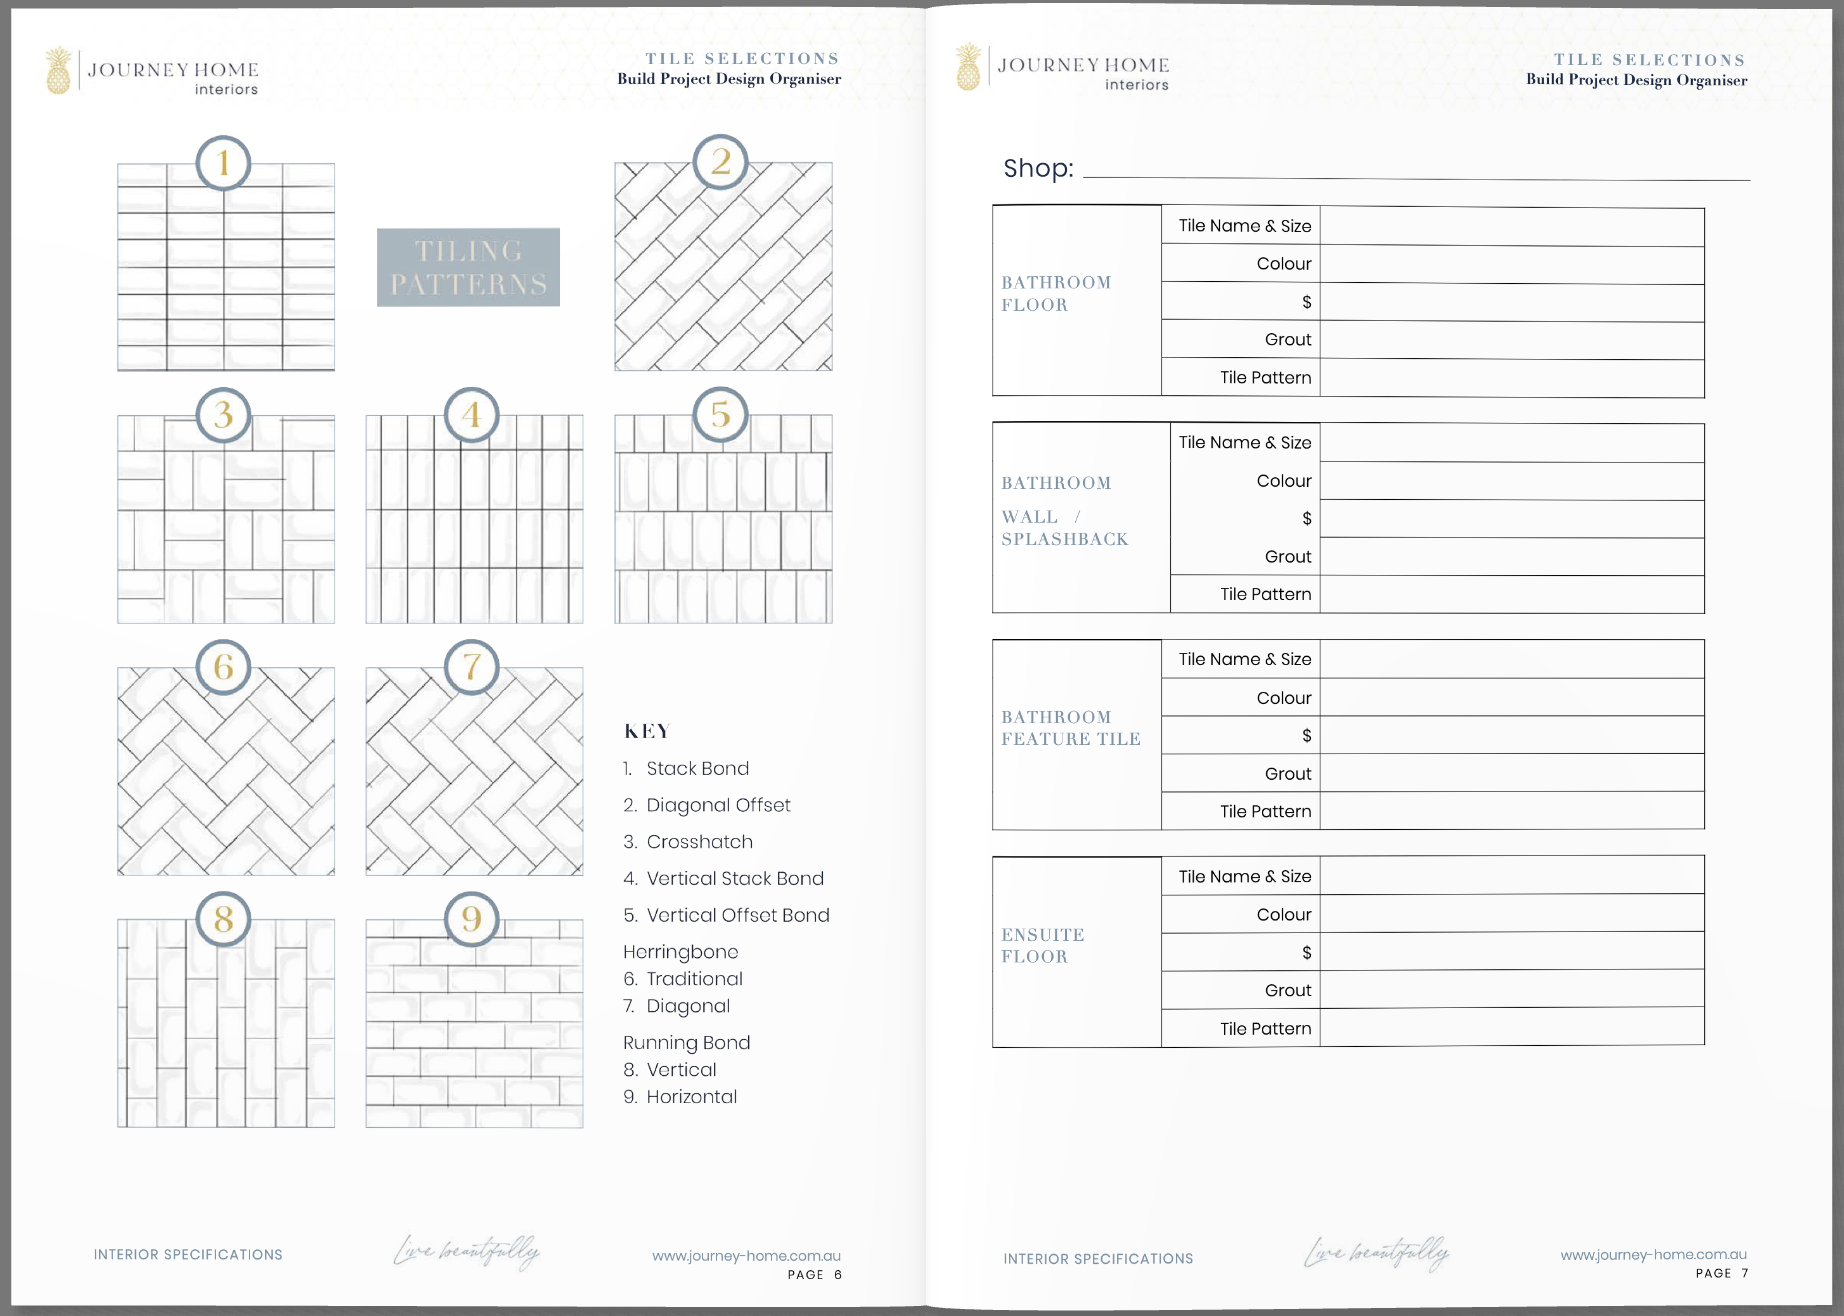 tile selections sheet for organisation layout types interior design build project renovation